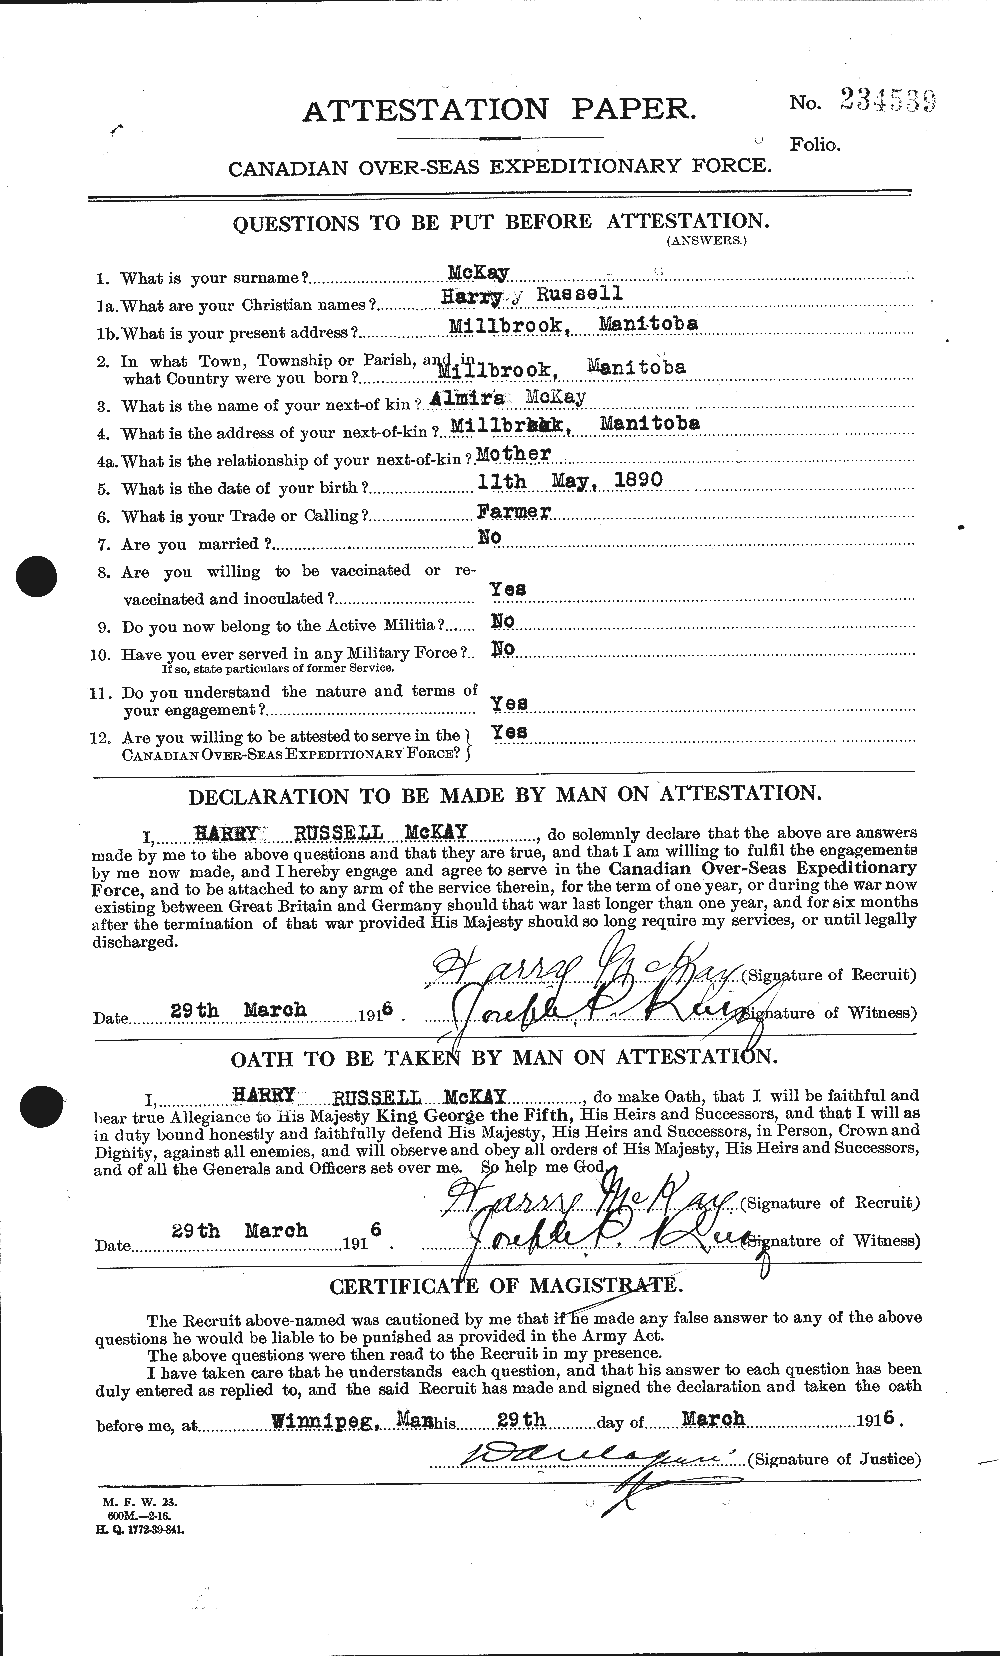 Personnel Records of the First World War - CEF 534735a